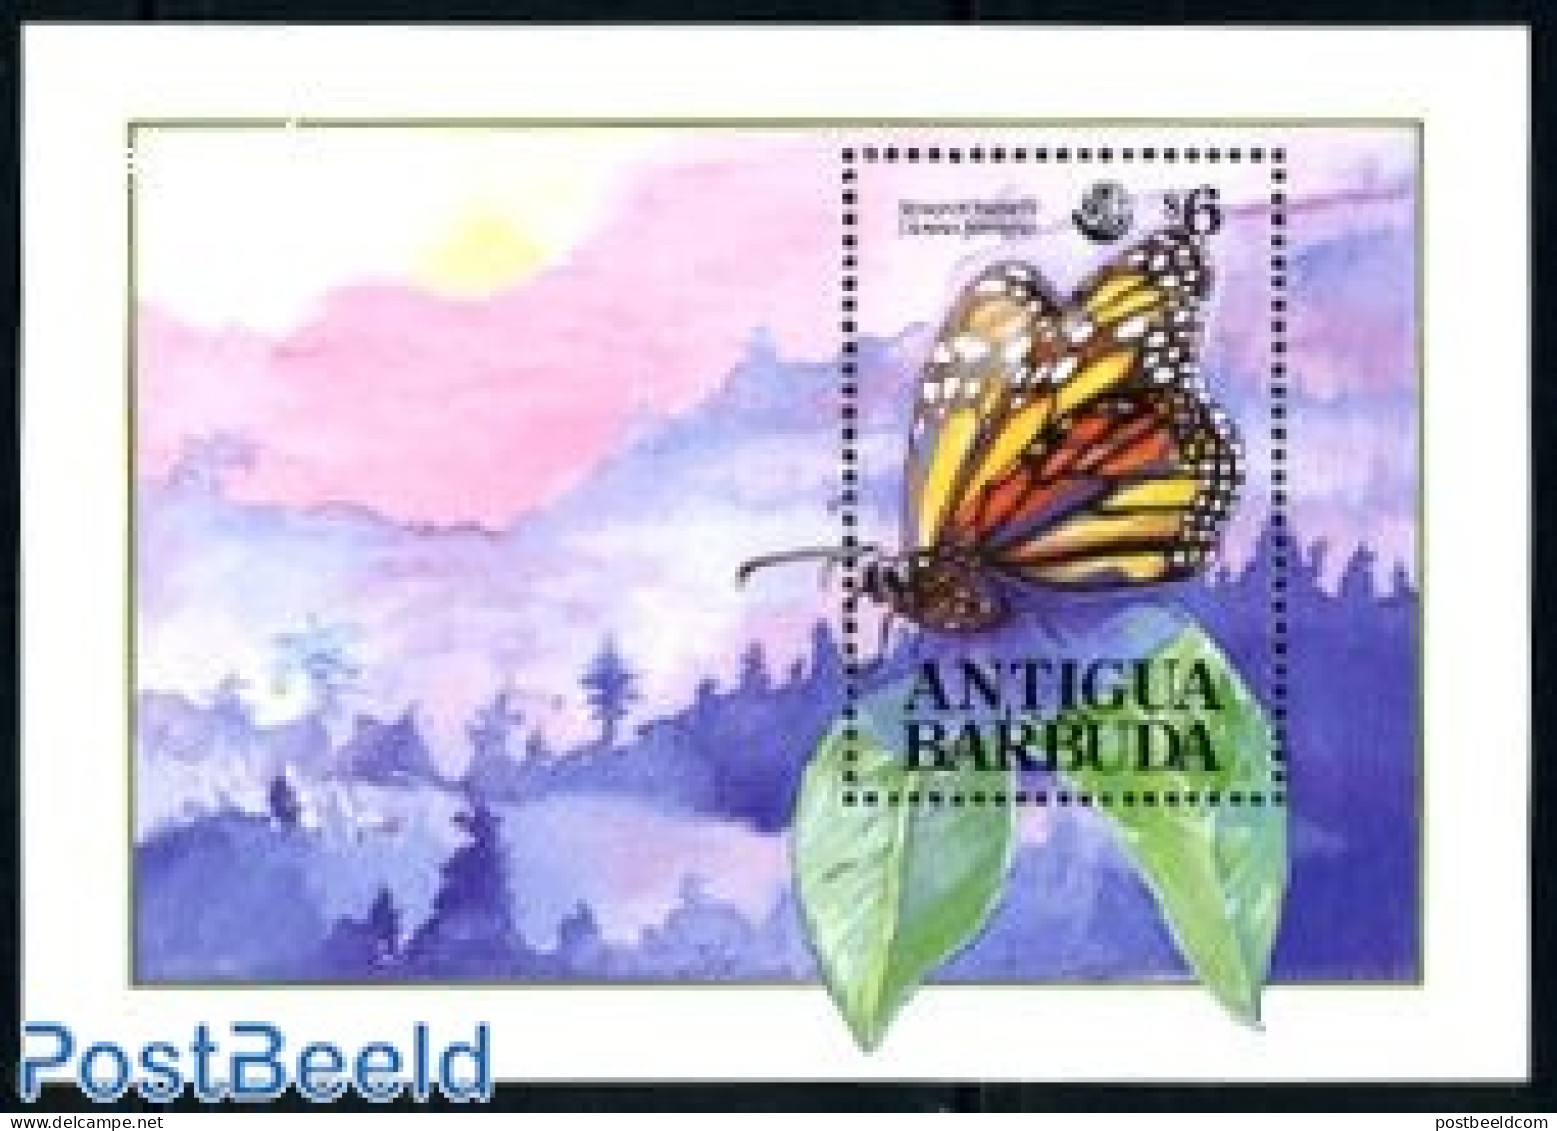 Antigua & Barbuda 1992 UNCED S/s, Mint NH, Nature - Butterflies - Environment - Environment & Climate Protection